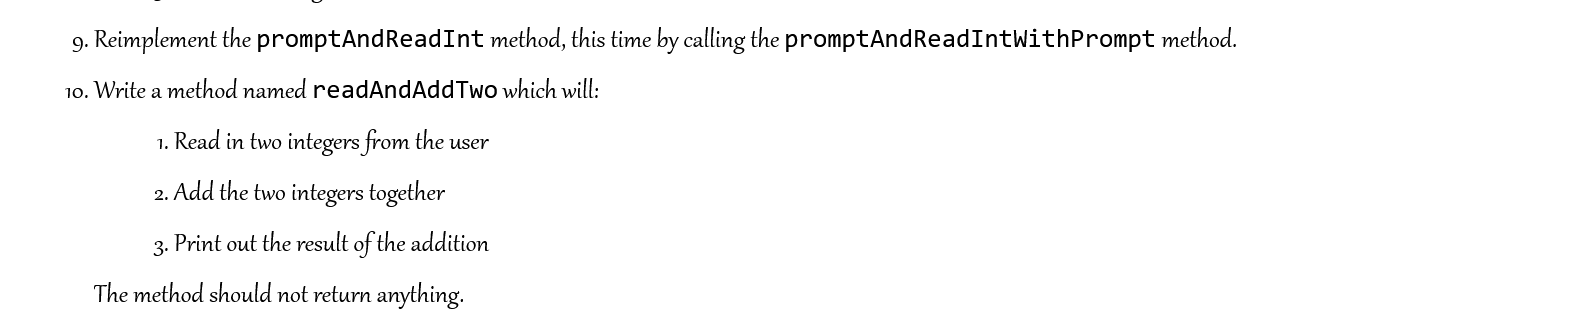 9. Reimplement the promptAnd ReadInt method, this time by calling the promptAndReadIntWithPrompt method. 10.